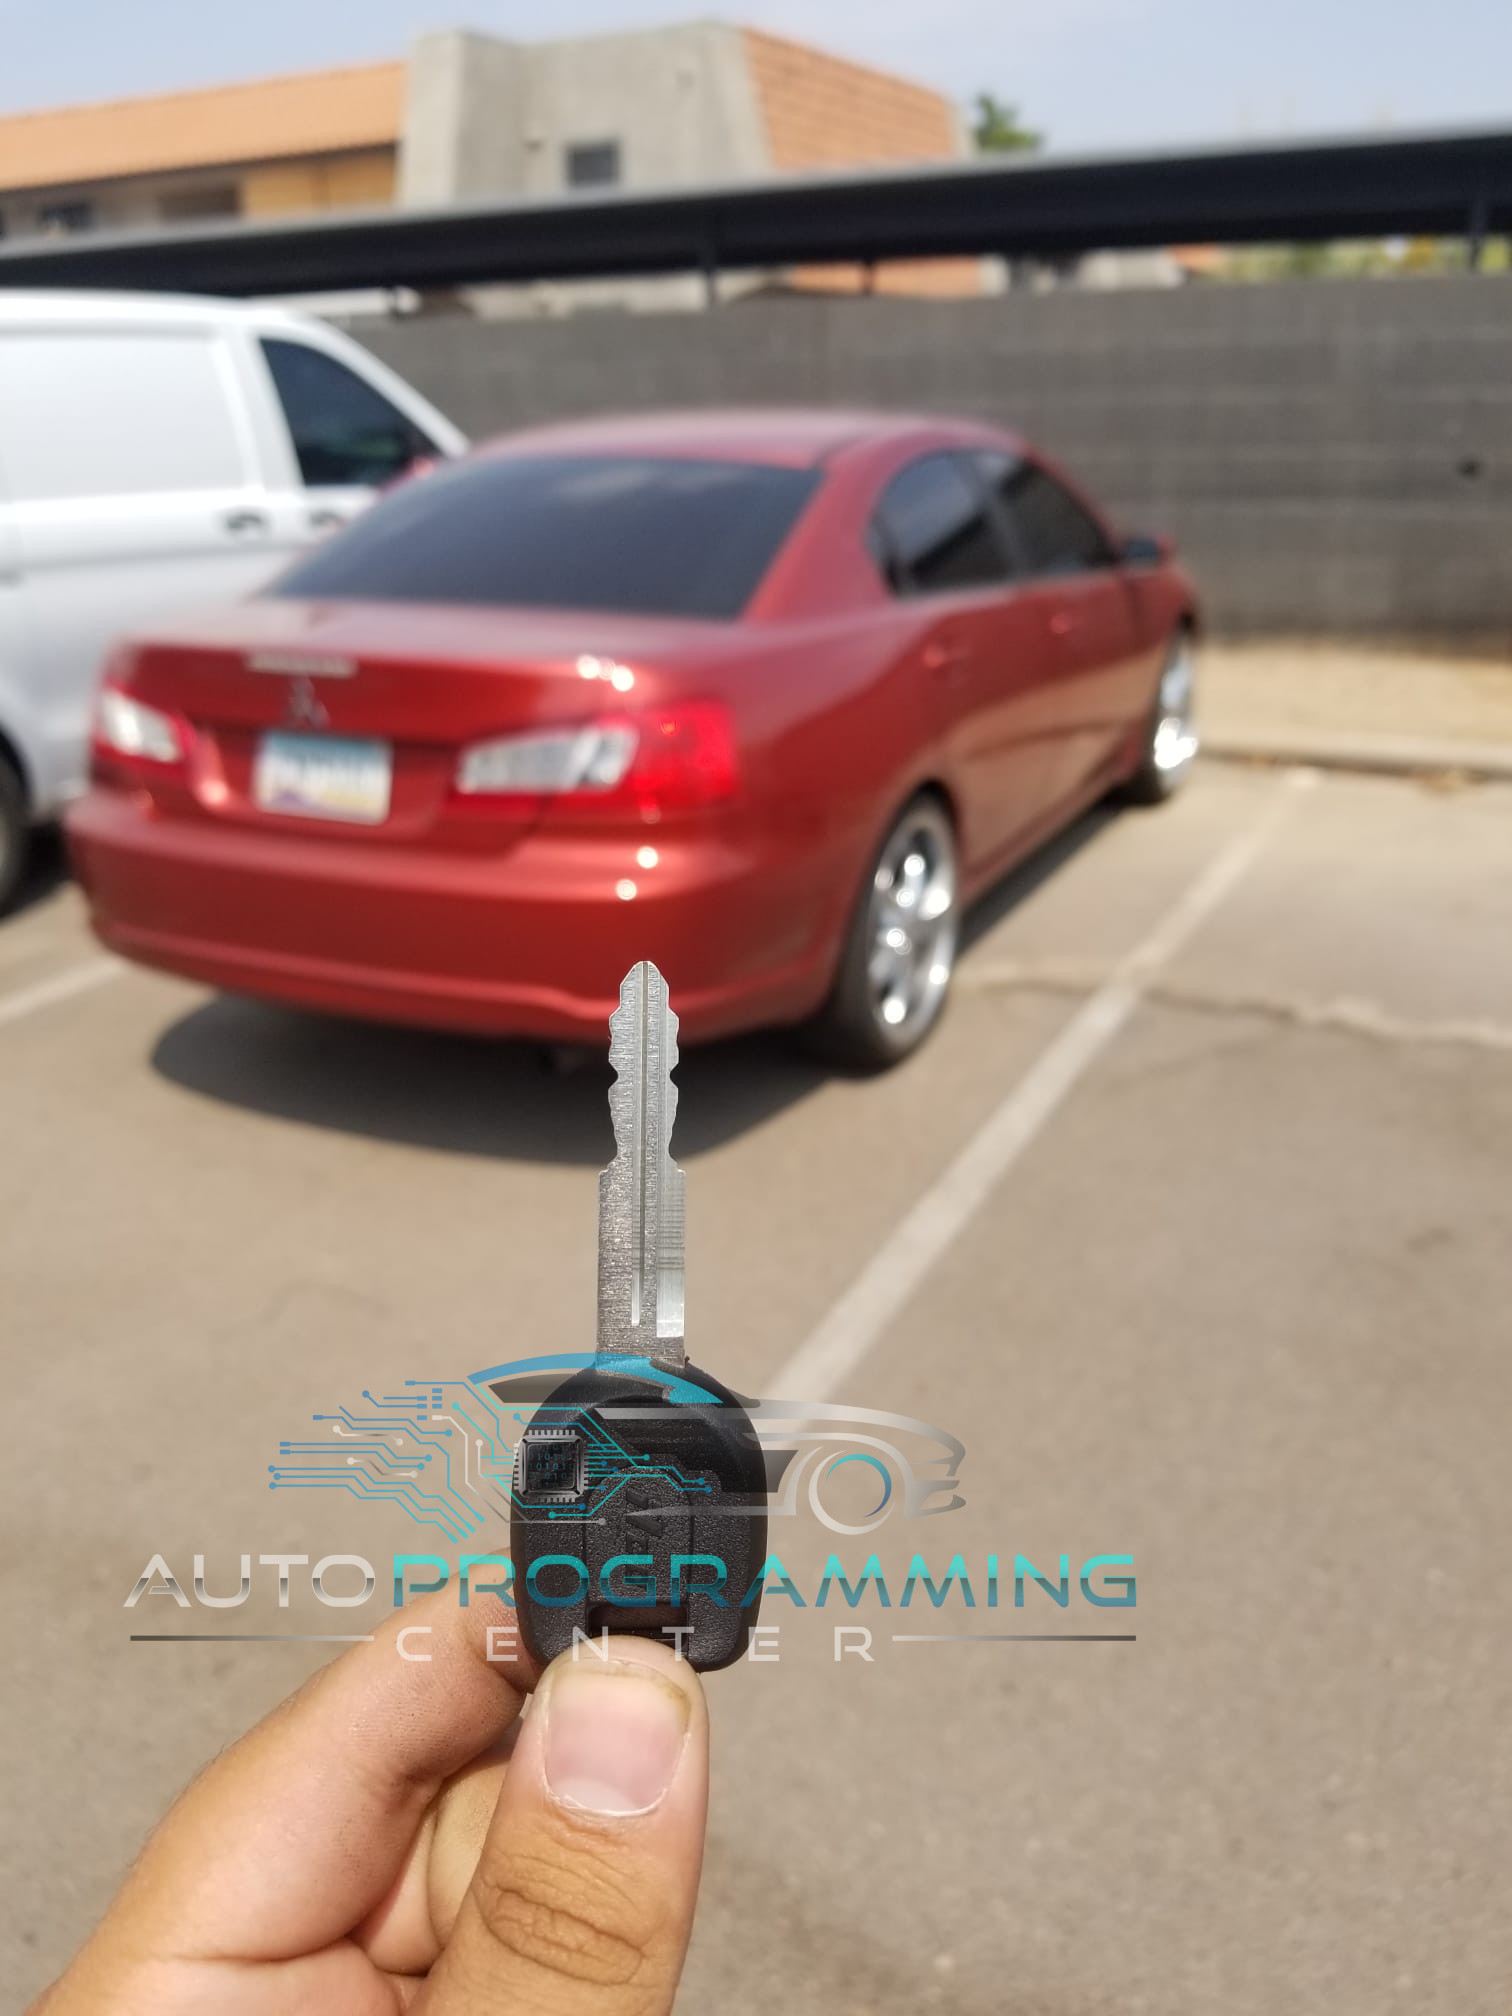 High-resolution image showcasing an automotive locksmith programming a Mitsubishi key fob for enhanced security and convenience.